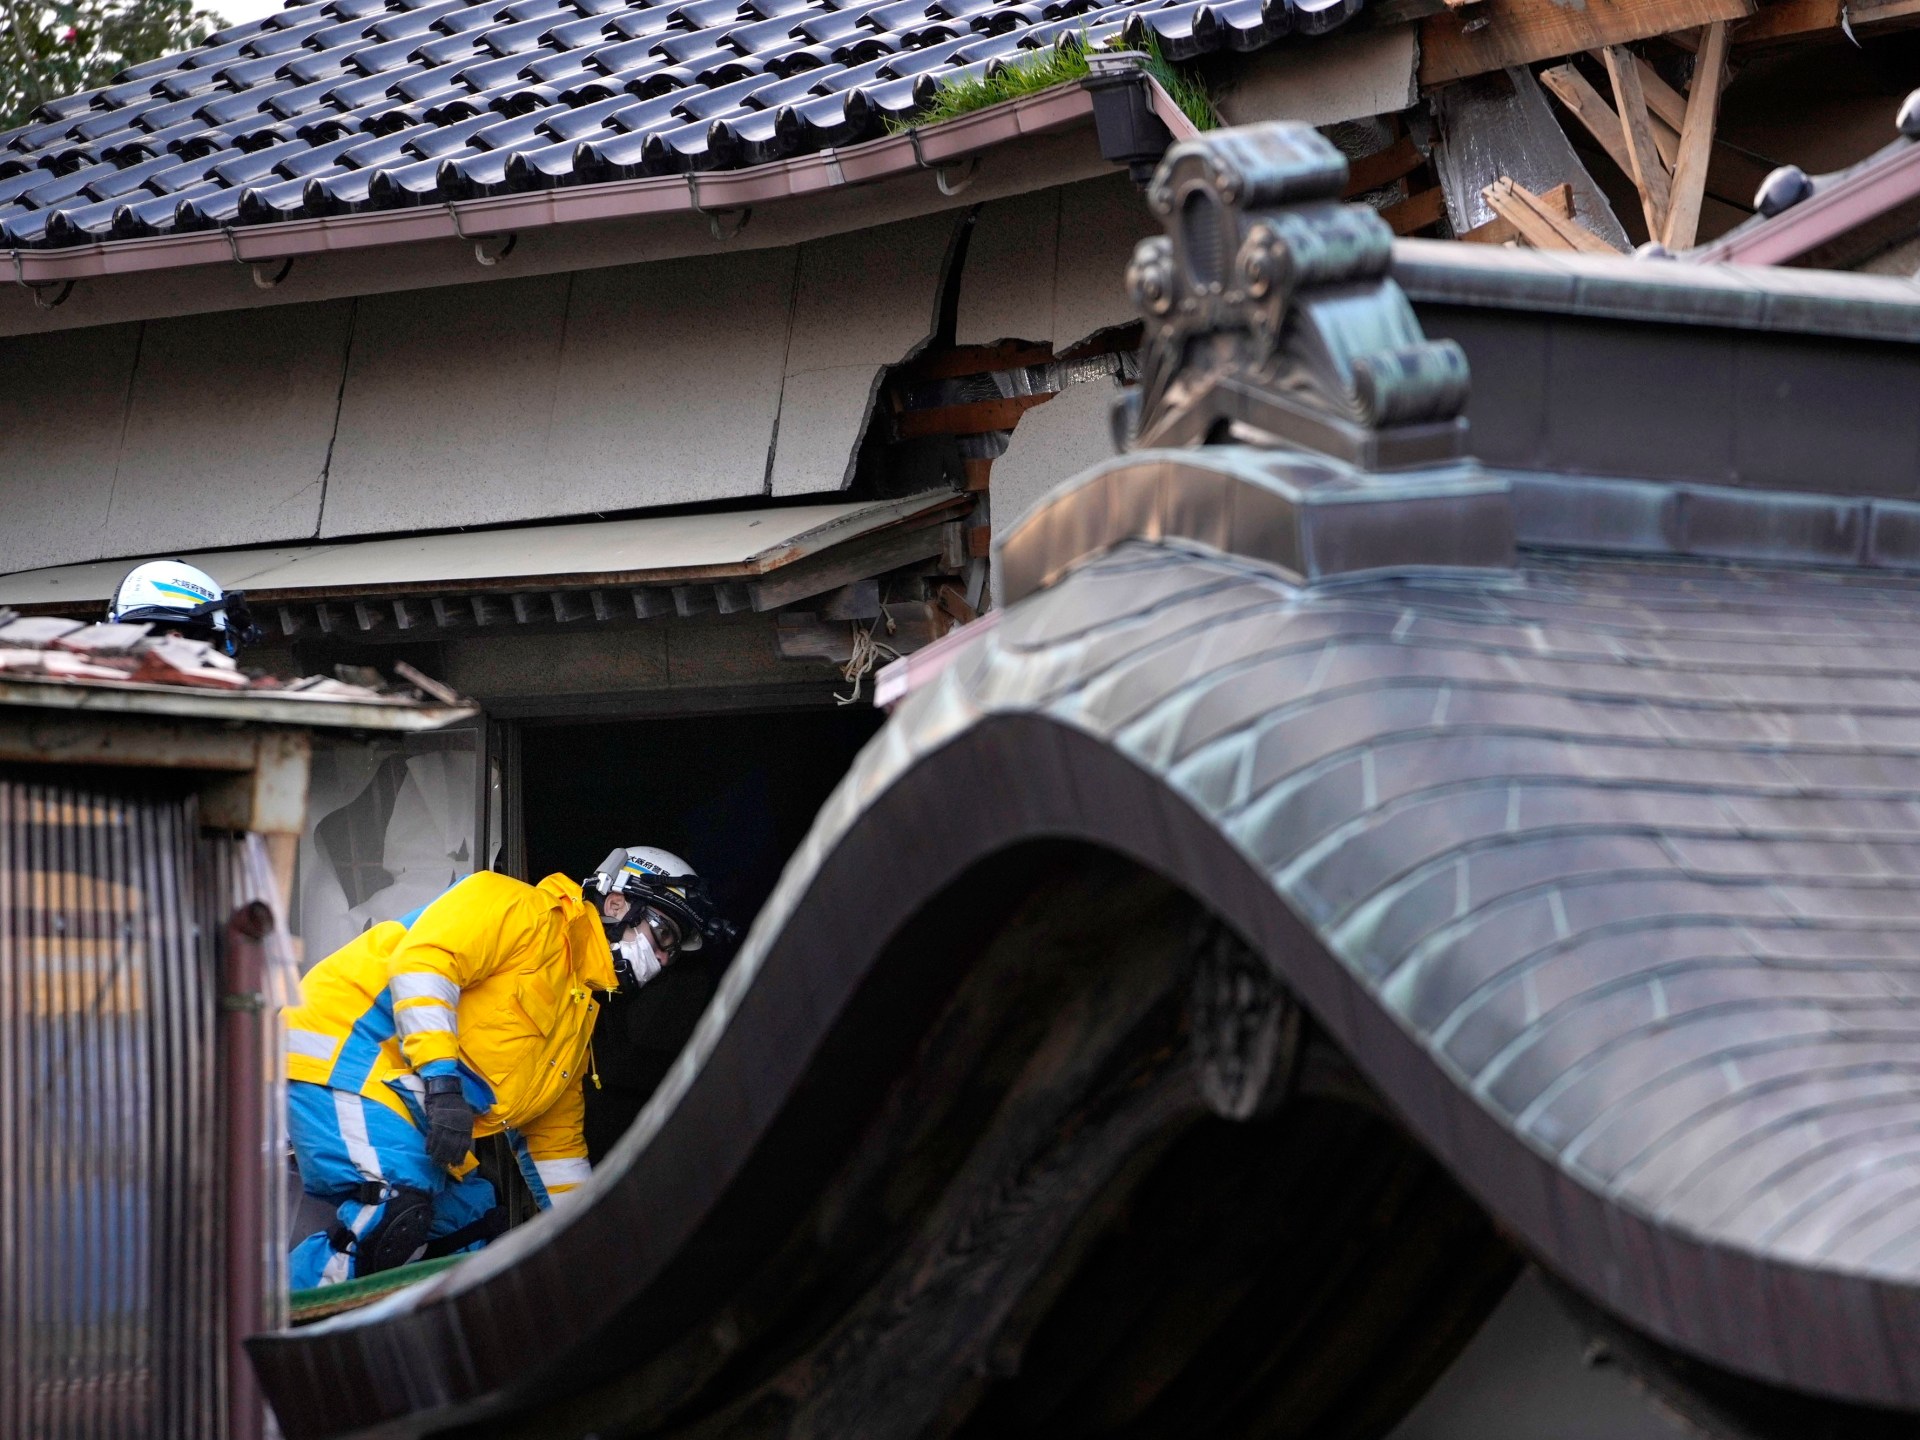 Woman in her 90s pulled alive from rubble of Japan earthquake | Earthquakes News